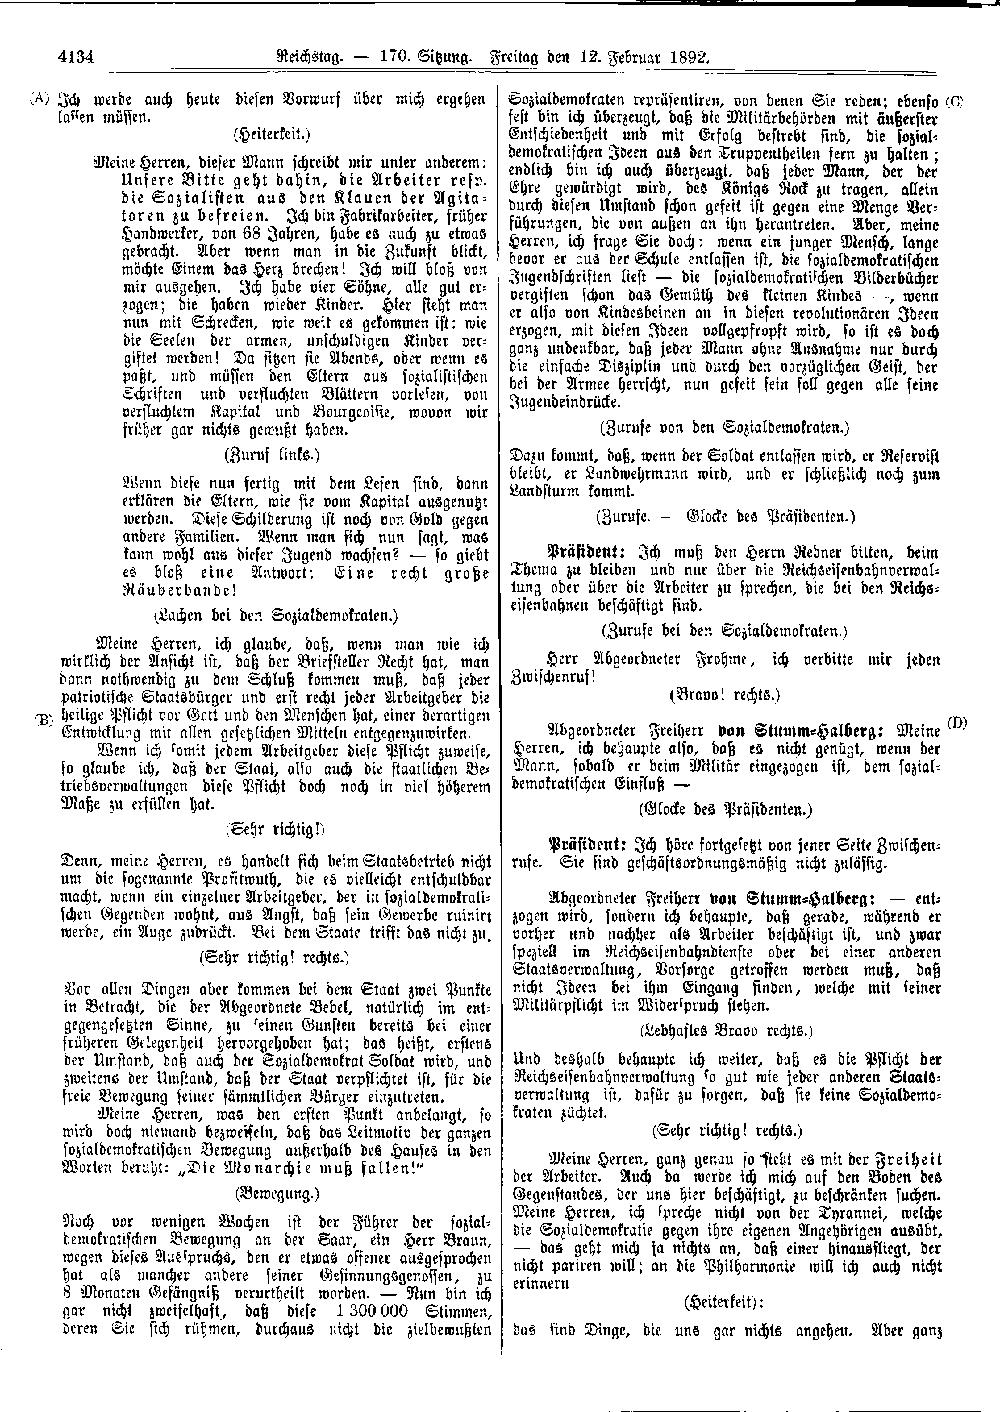 Scan of page 4134